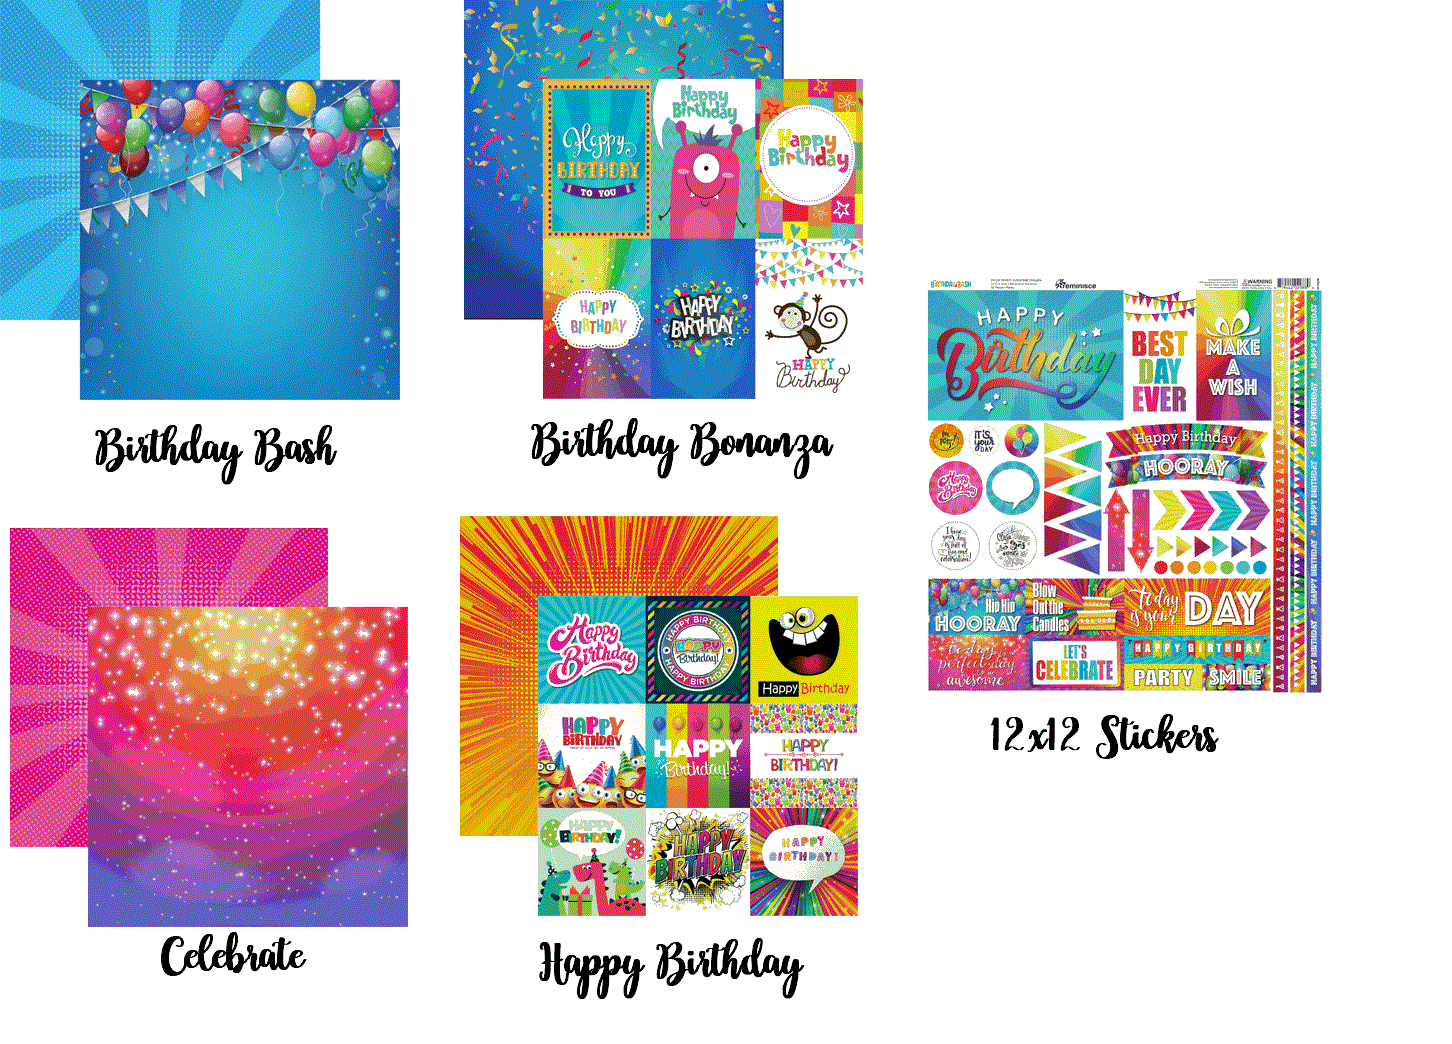 Birthday Bash Papers and Stickers by Reminisce